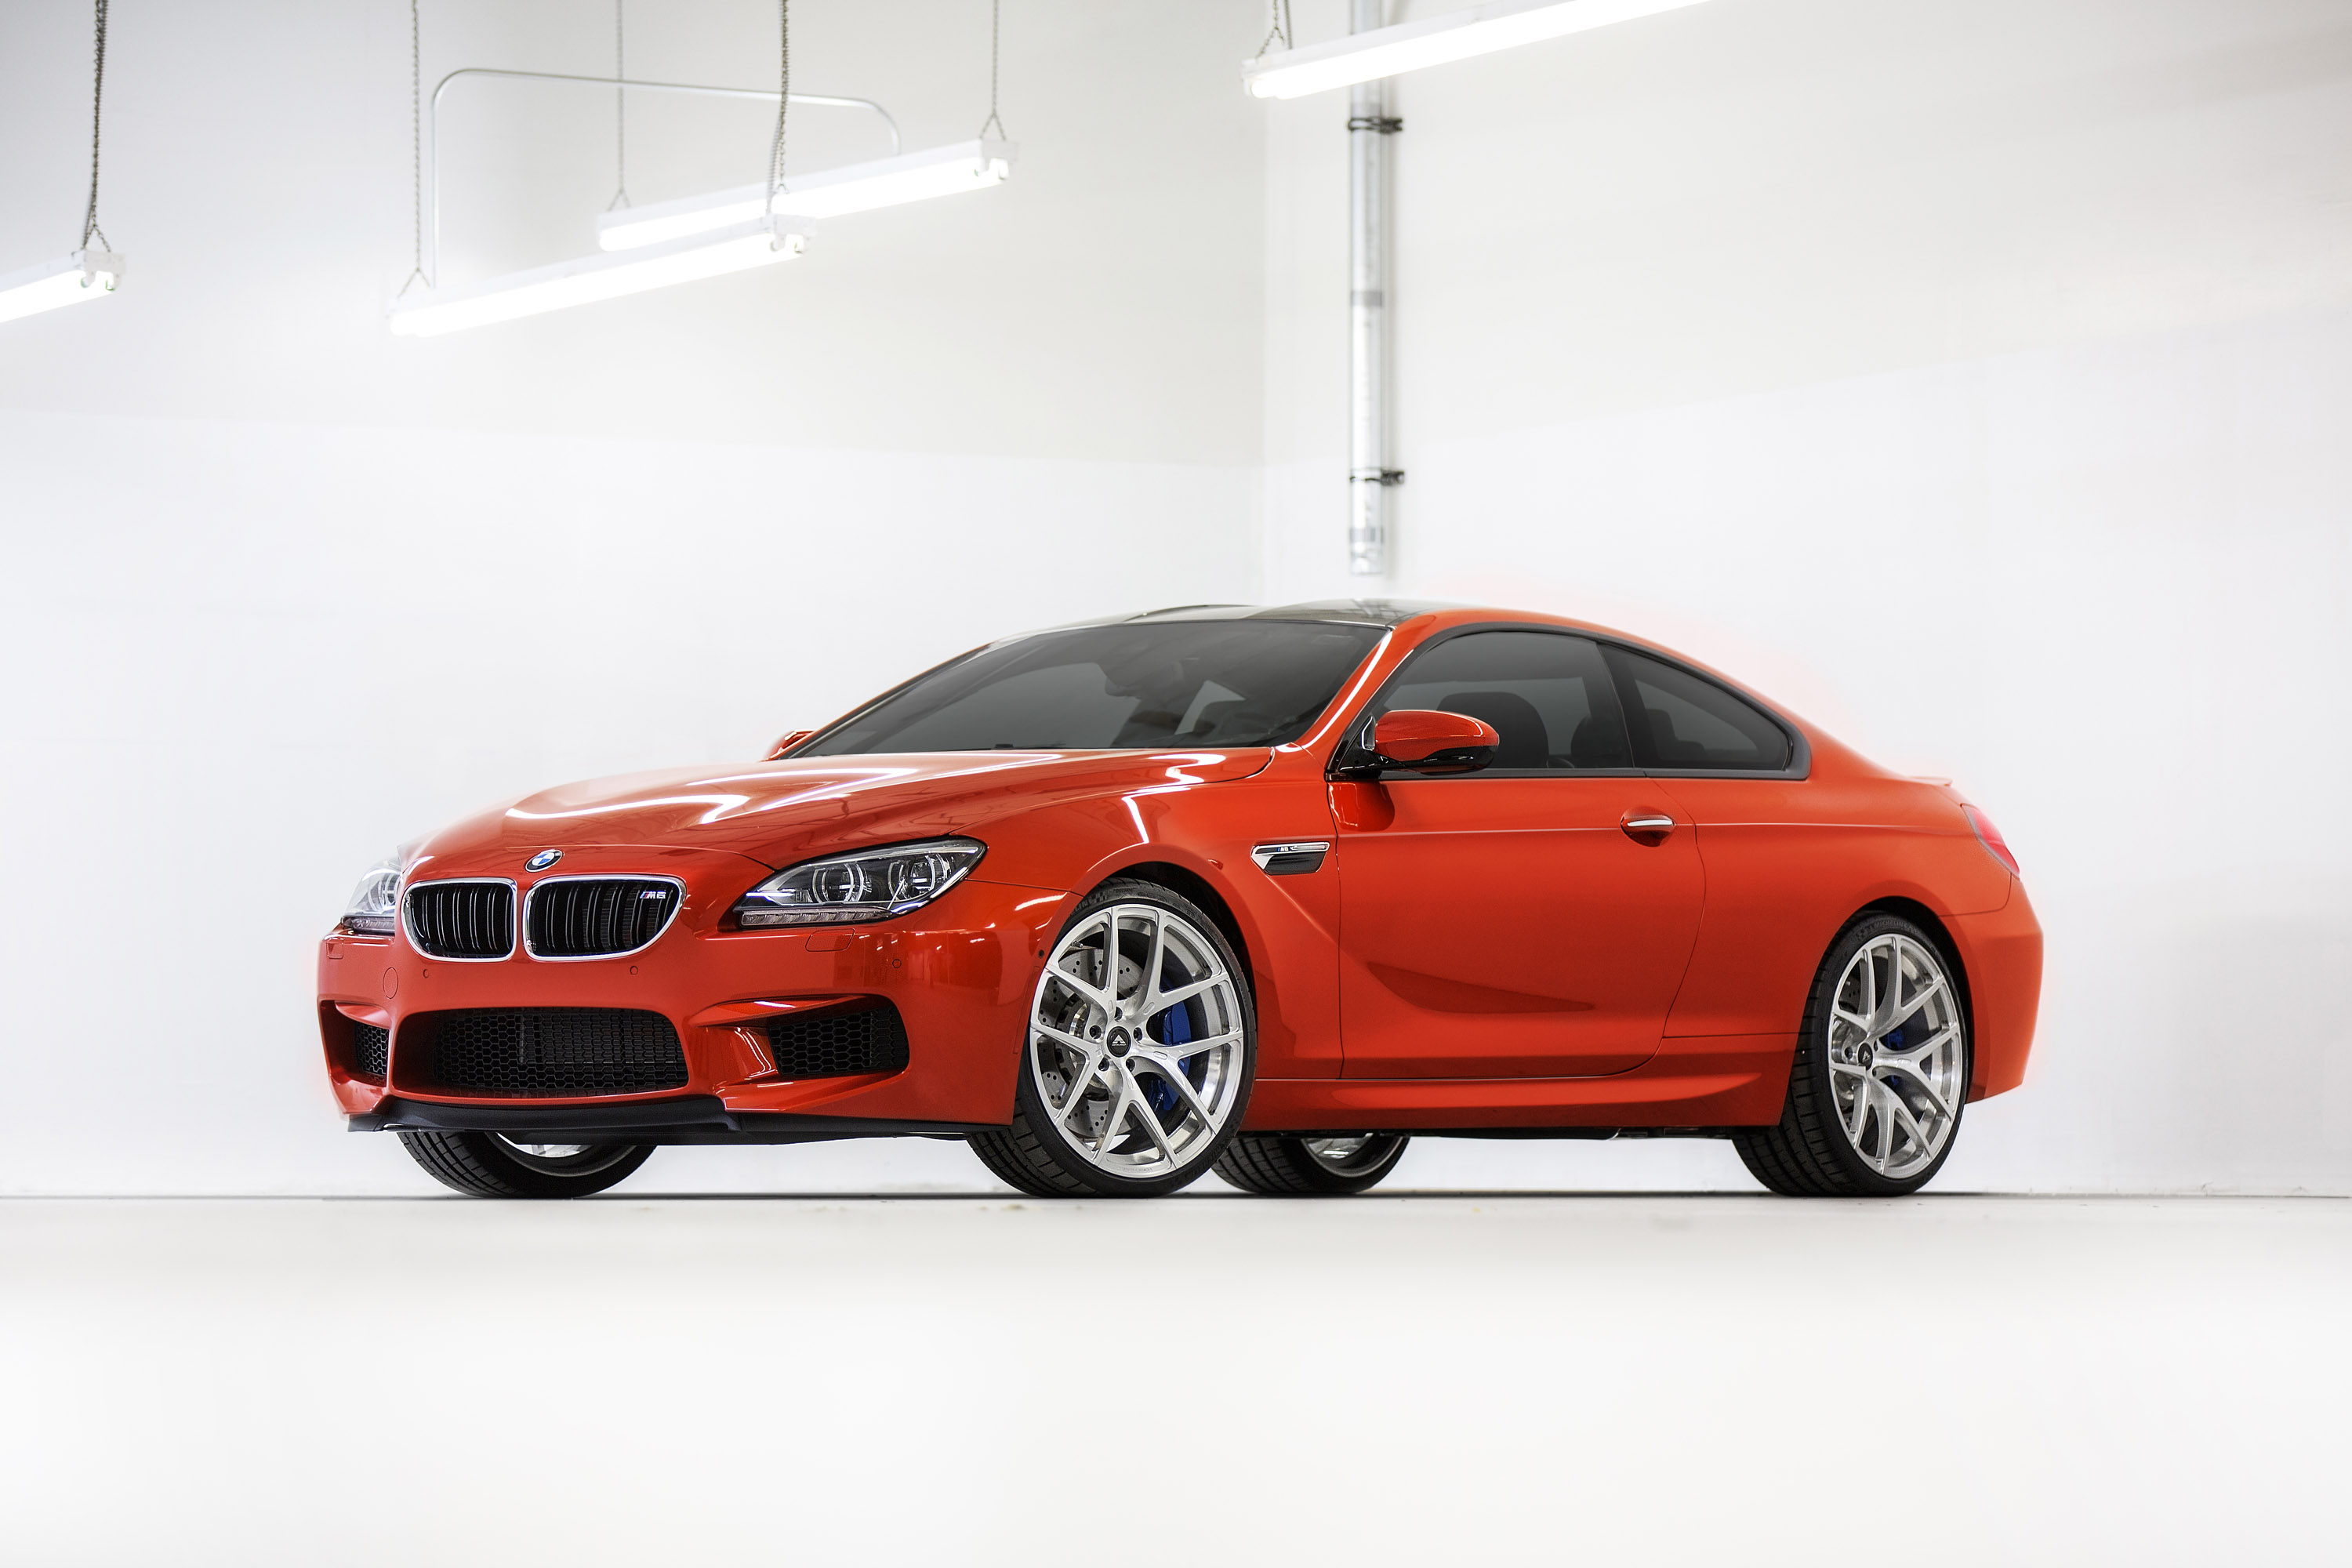 2013, Vorsteiner, Bmw, M6 coupe, Vs 110, Coupe, Tuning Wallpaper